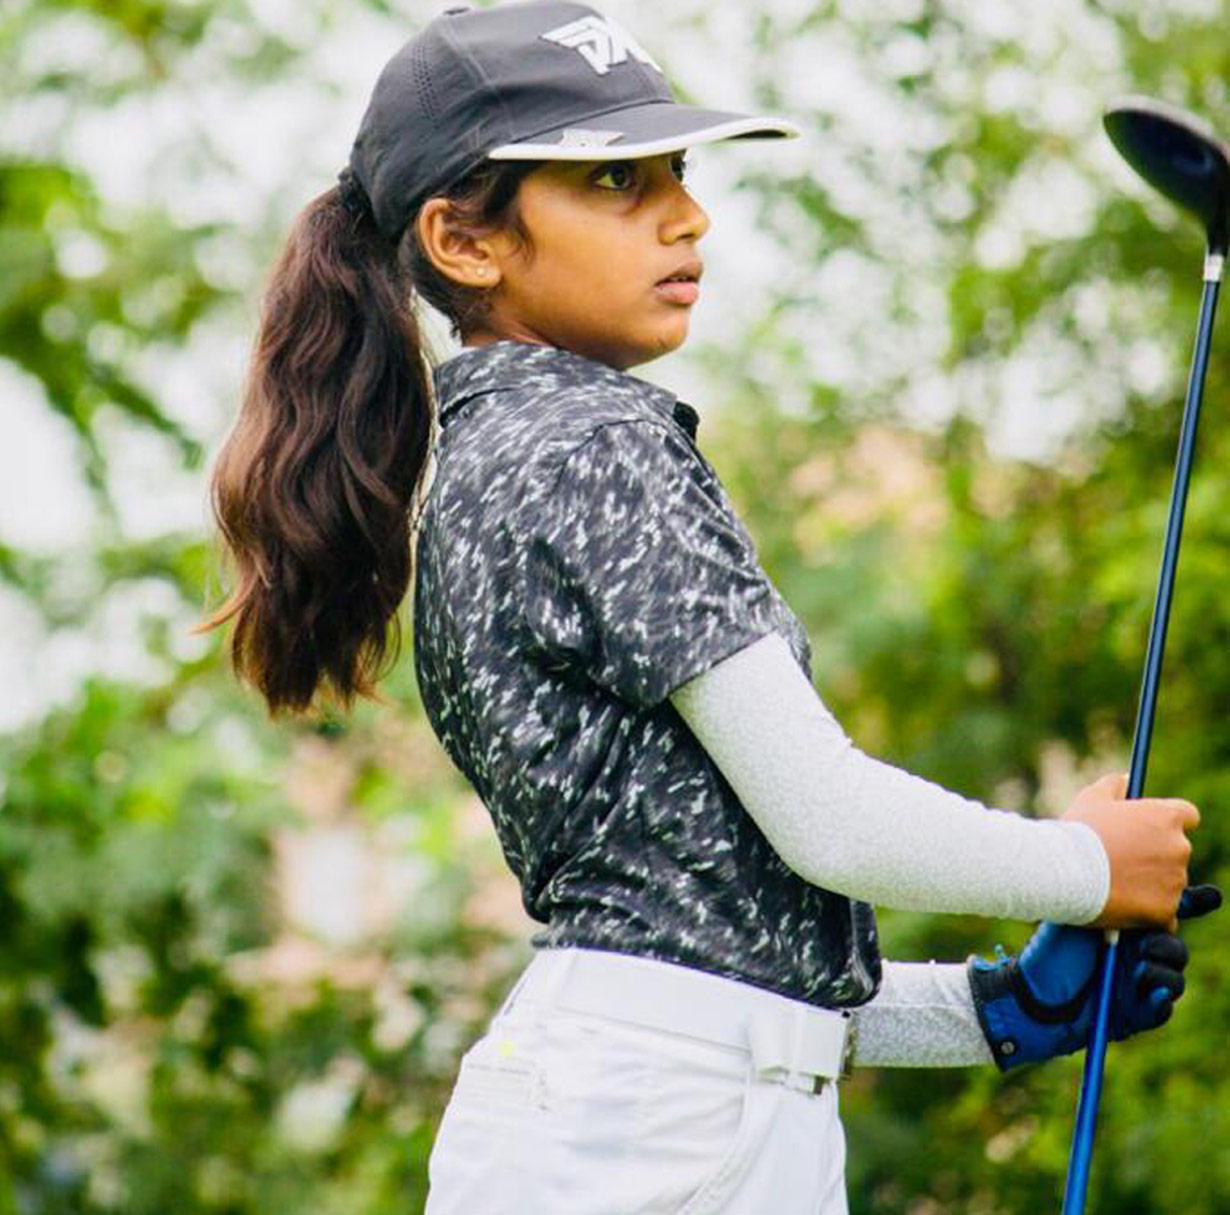 Keerthana finished 6th at Jaipur in the Girls C division